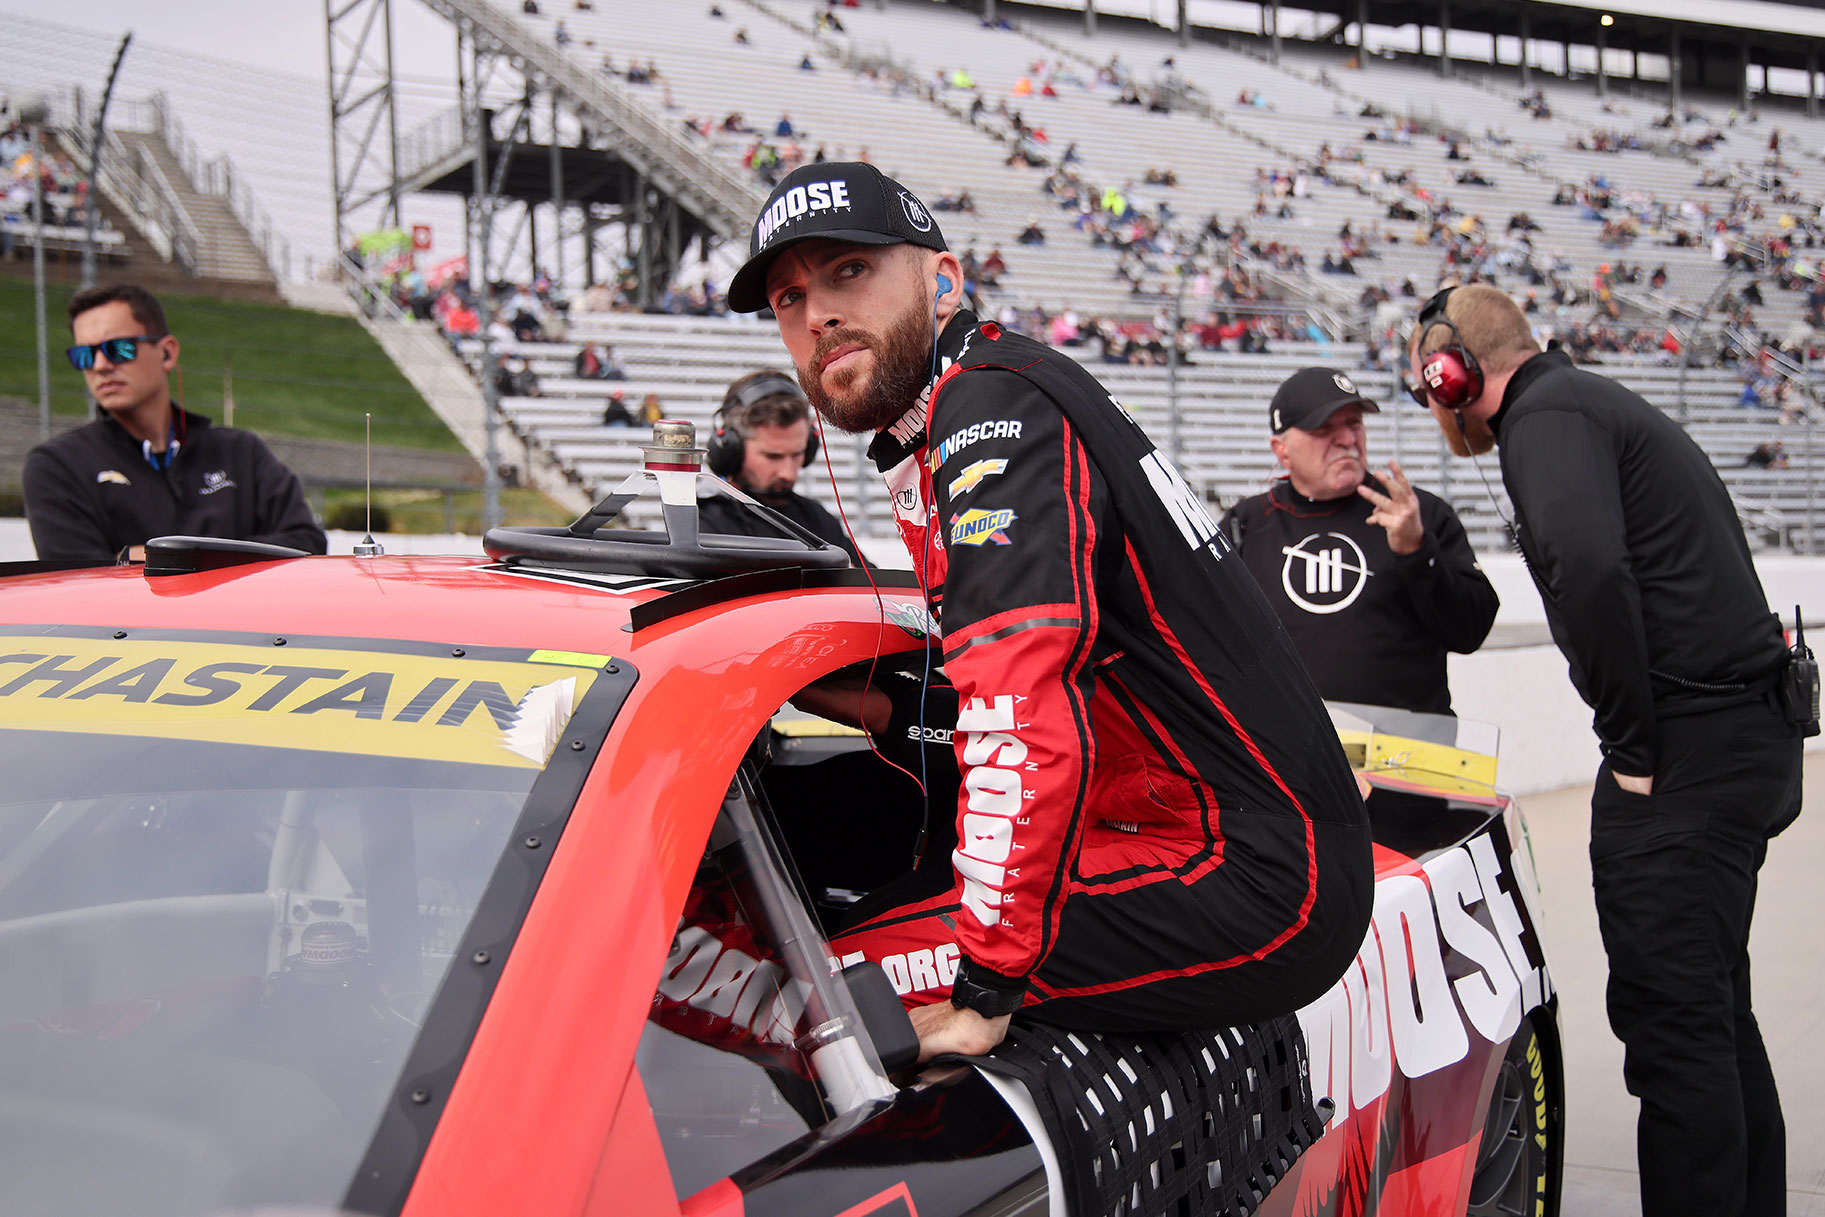 Ross Chastain, driver of the #1 Moose Fraternity Chevrolet, enters his car during qualifying for the NASCAR Cup Series Xfinity 500 at Martinsville Speedway